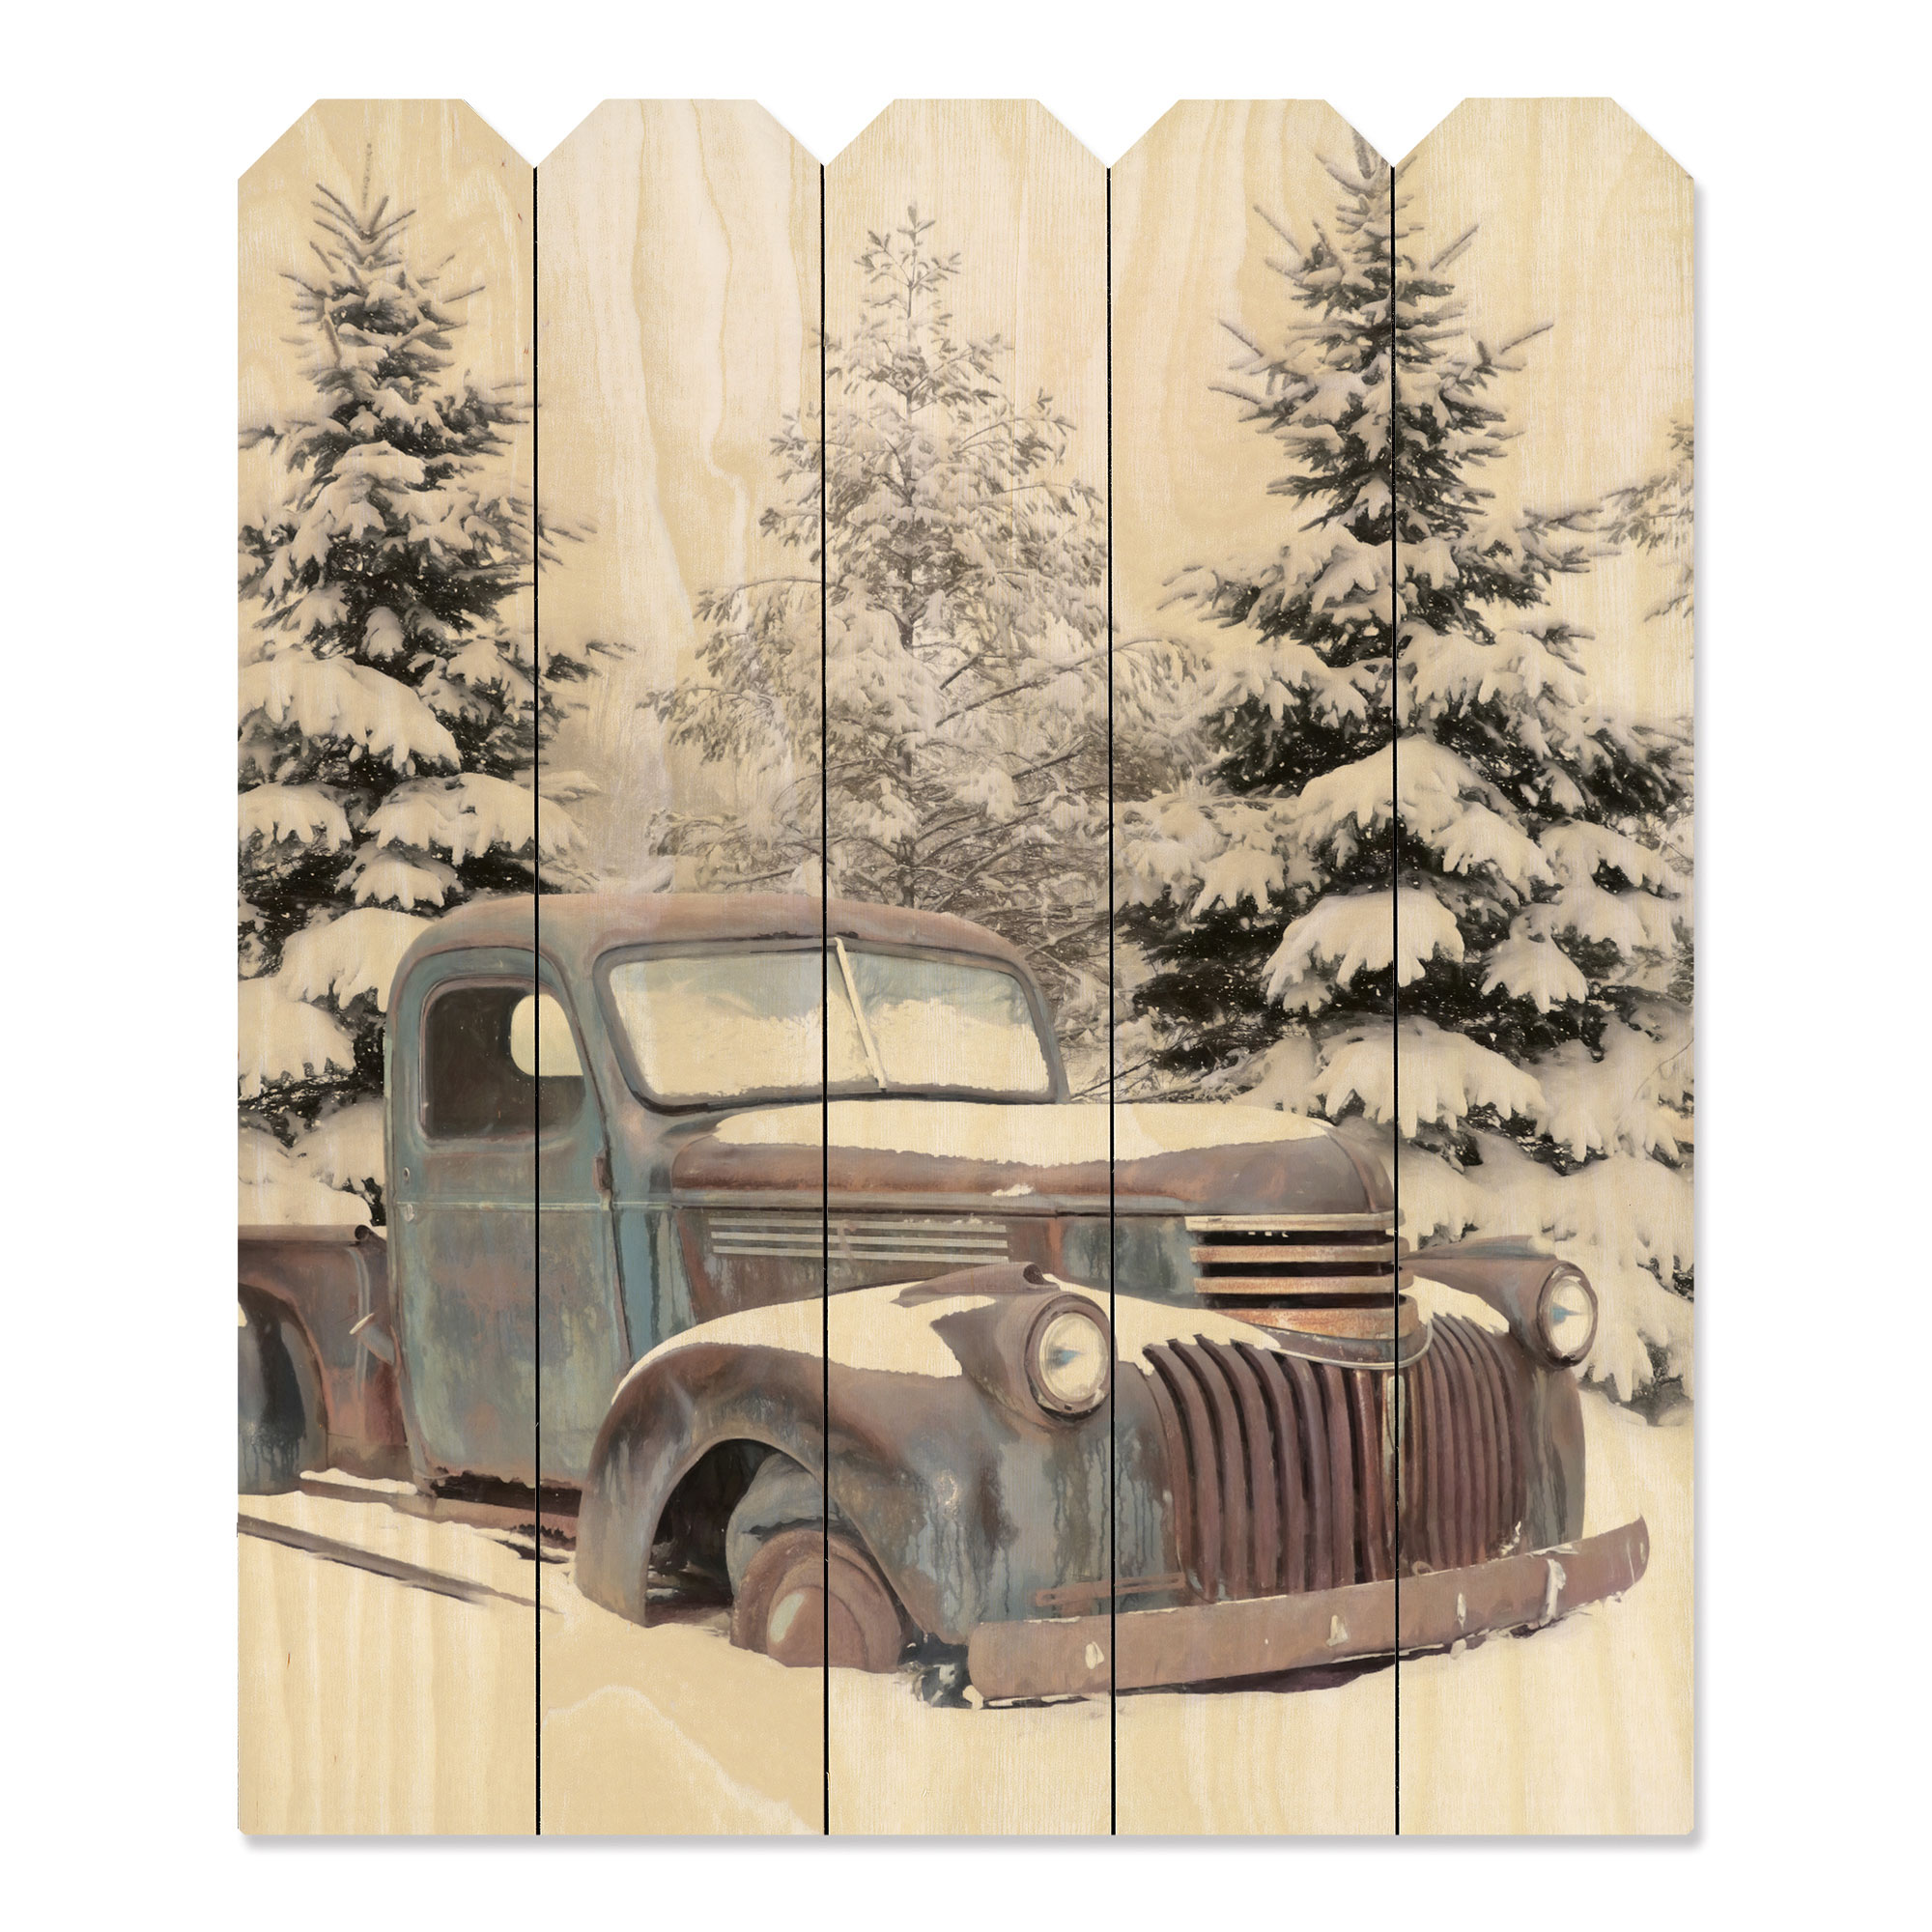 "Chevy at the Farm" By Artisan Lori Deiter, Printed on Wooden Picket Fence Wall Art